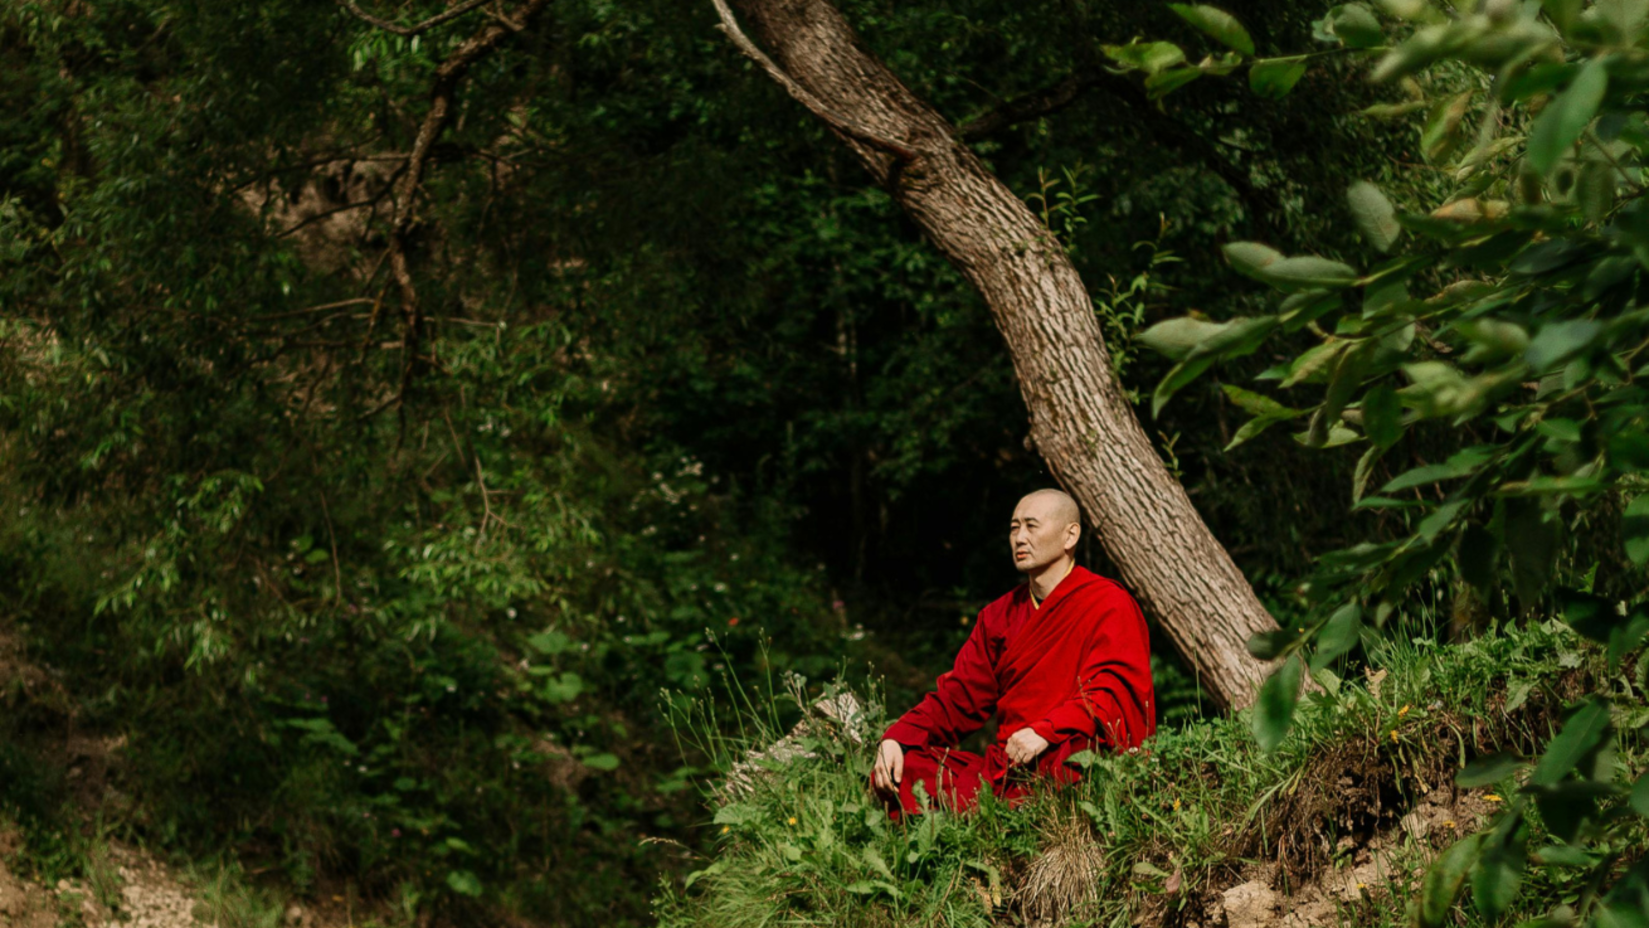 A monk in red robes sitting peacefully by a river under a green tree.